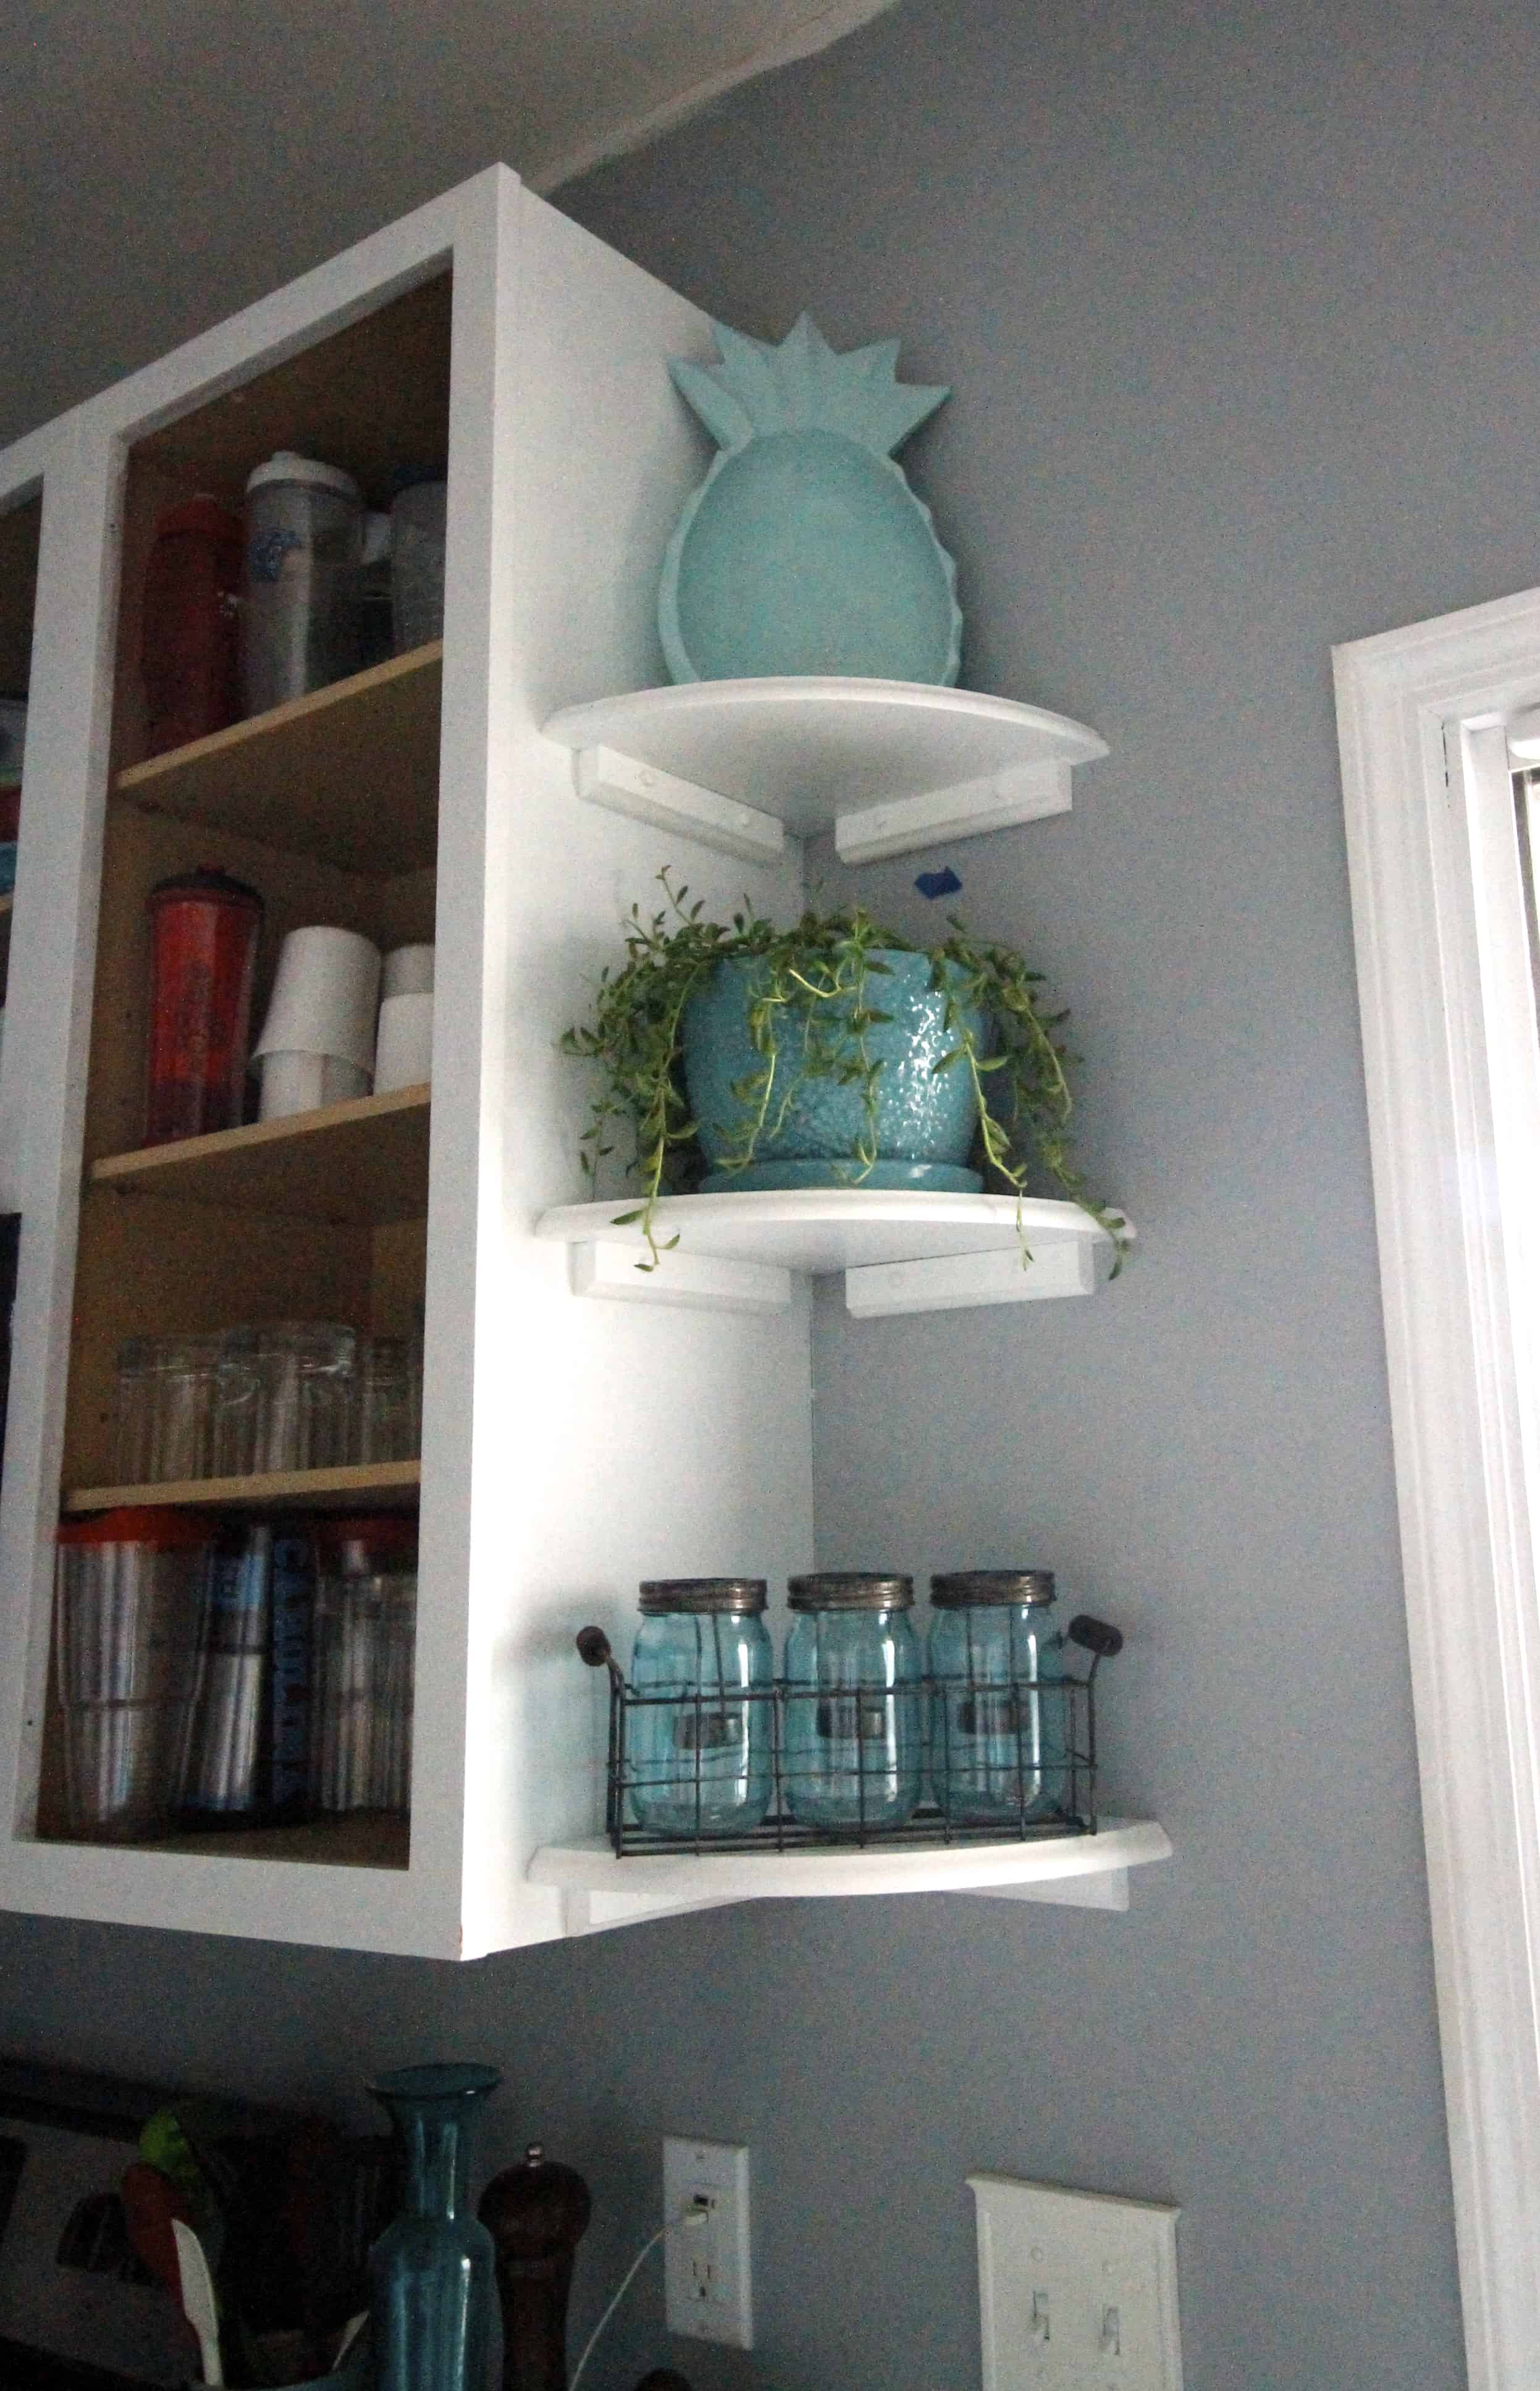 Easy Open Shelving in the Kitchen